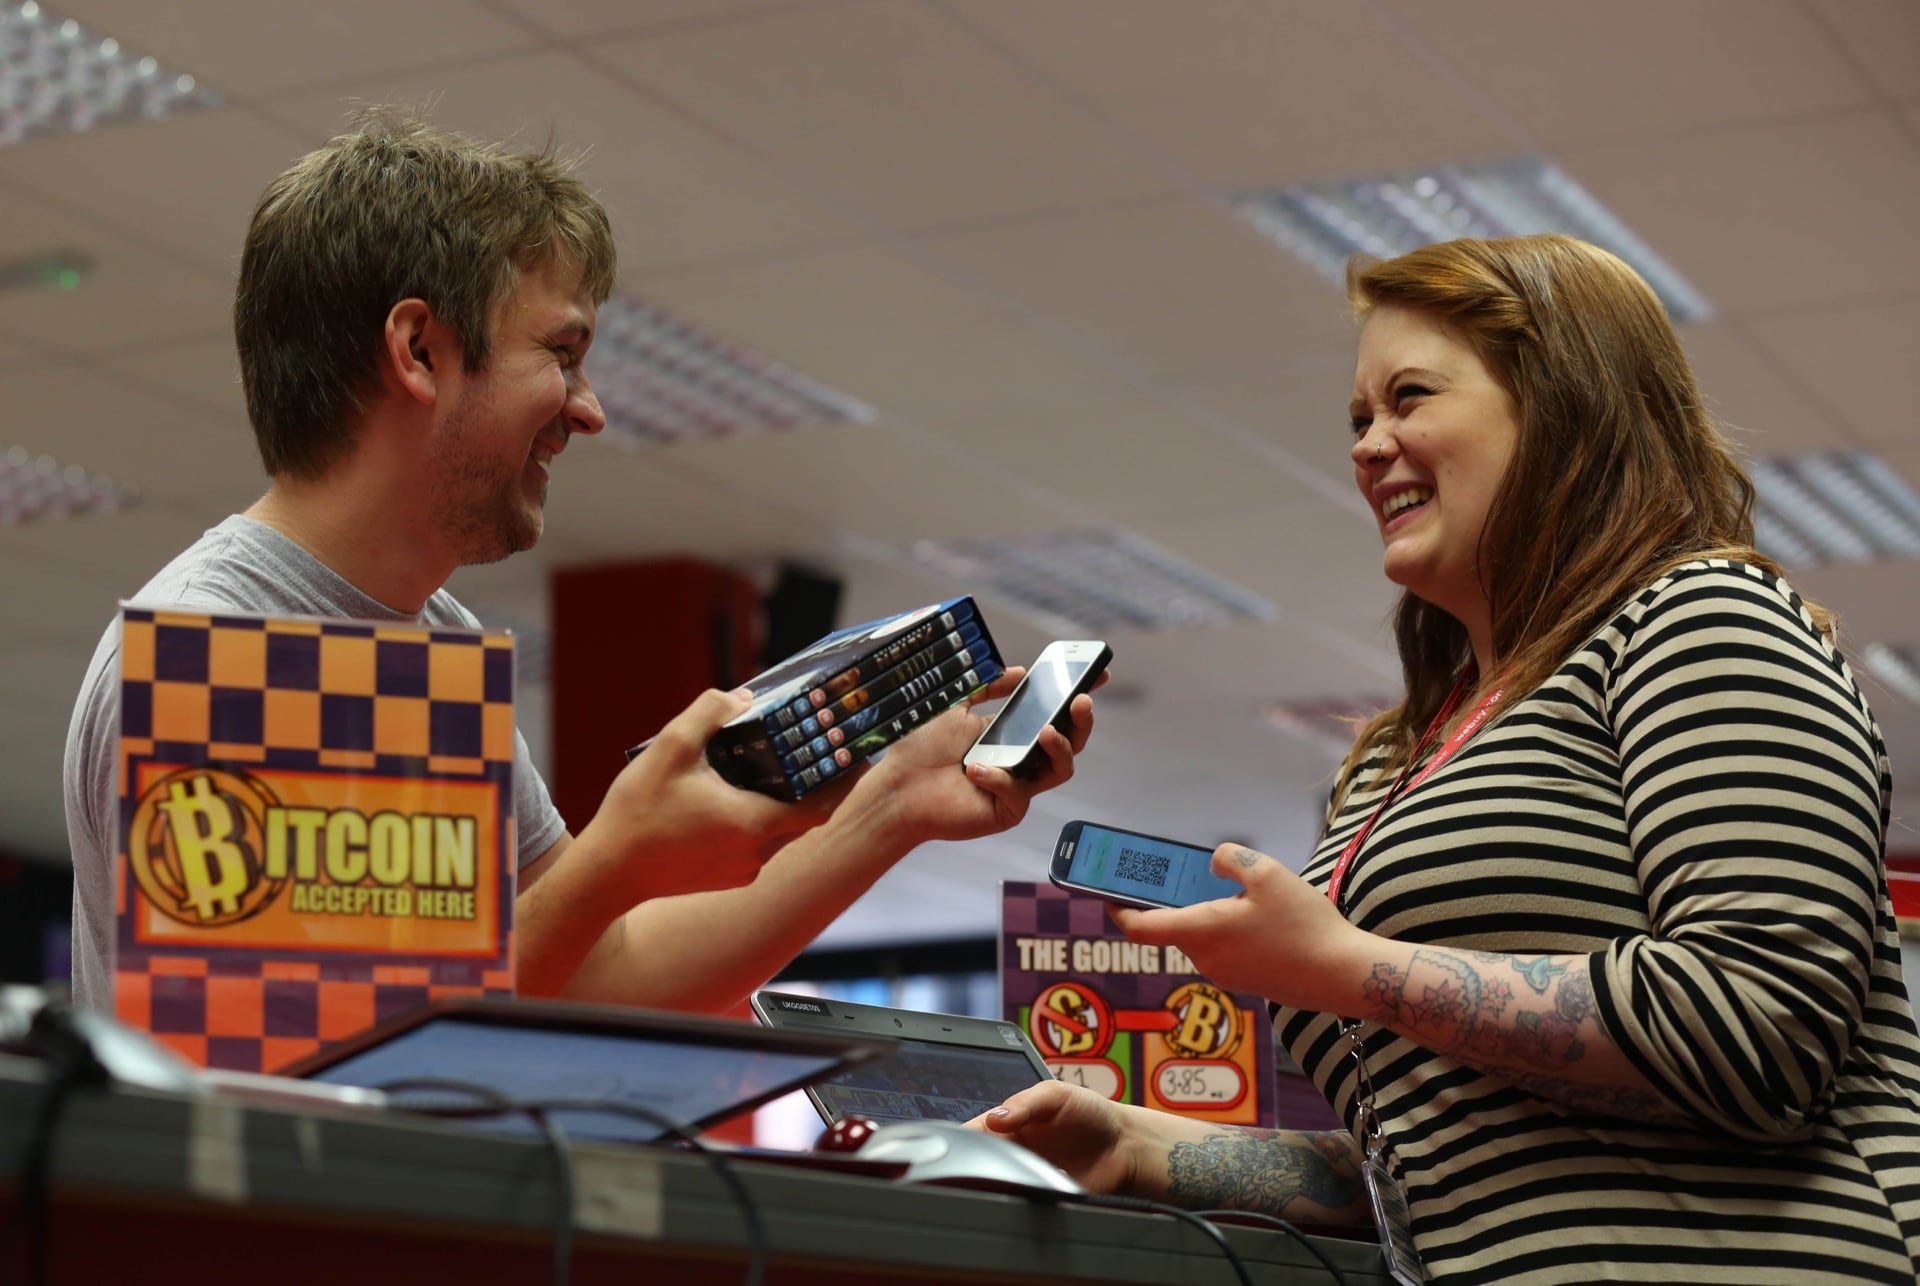 CeX replaces the Pound with Bitcoin in Glasgow - Bitcoin ...